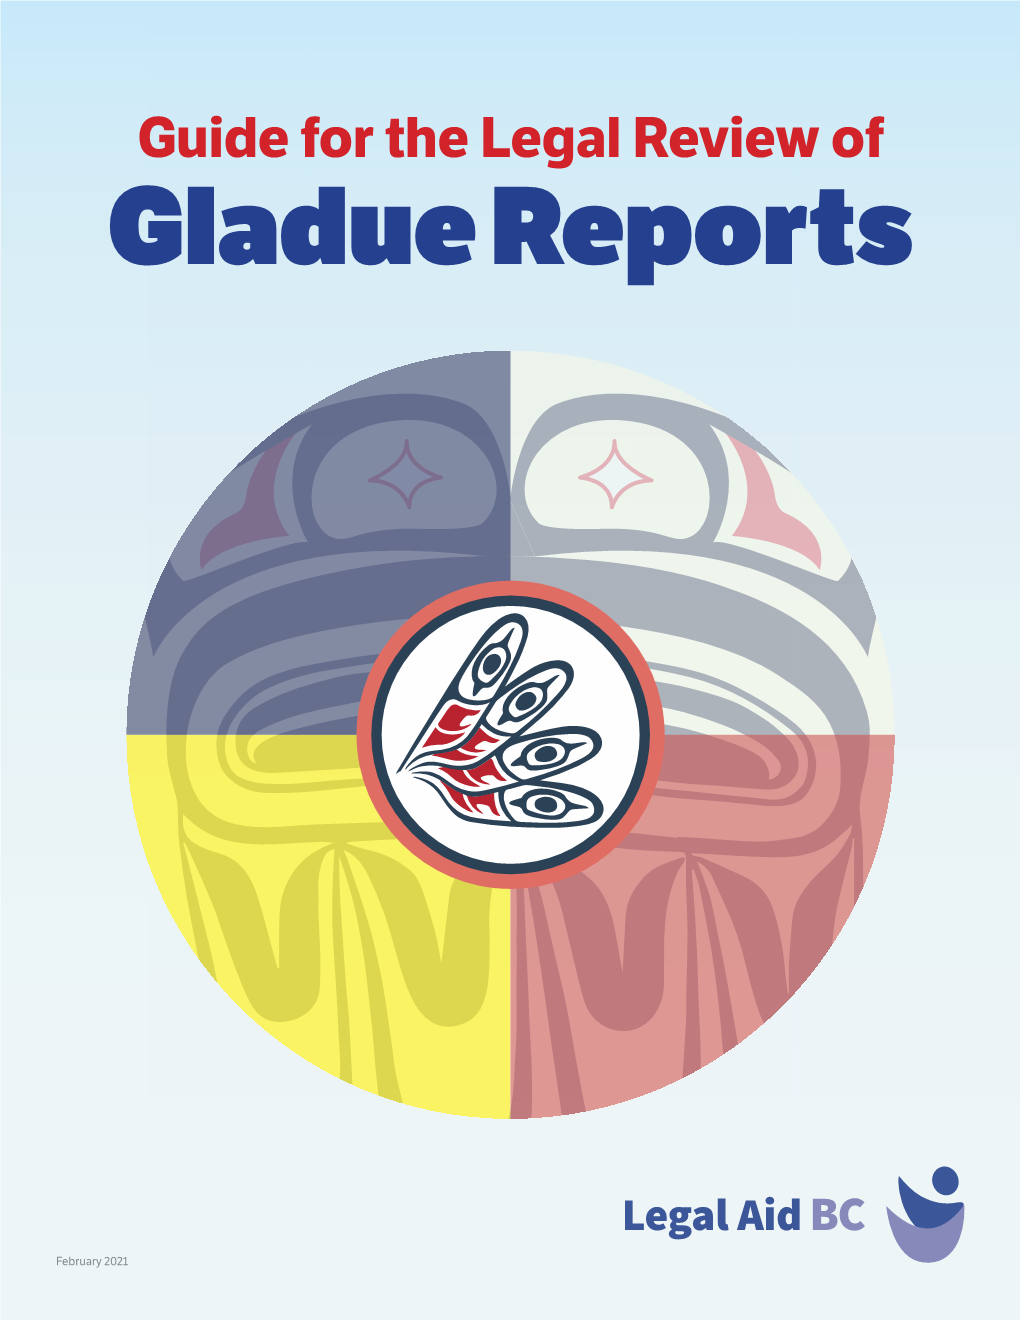 Guide for the Legal Review of Gladue Reports